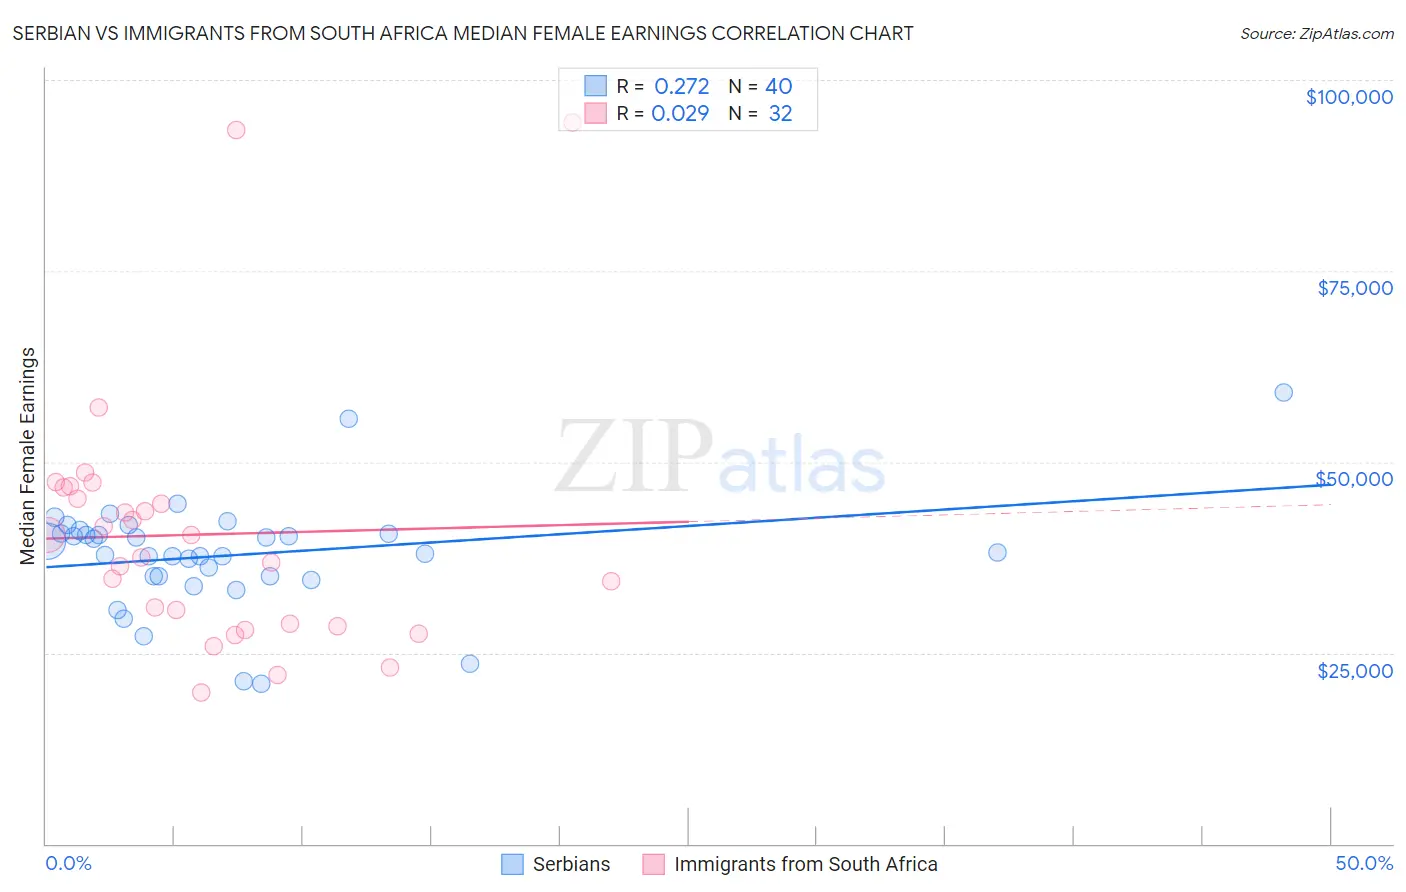 Serbian vs Immigrants from South Africa Median Female Earnings